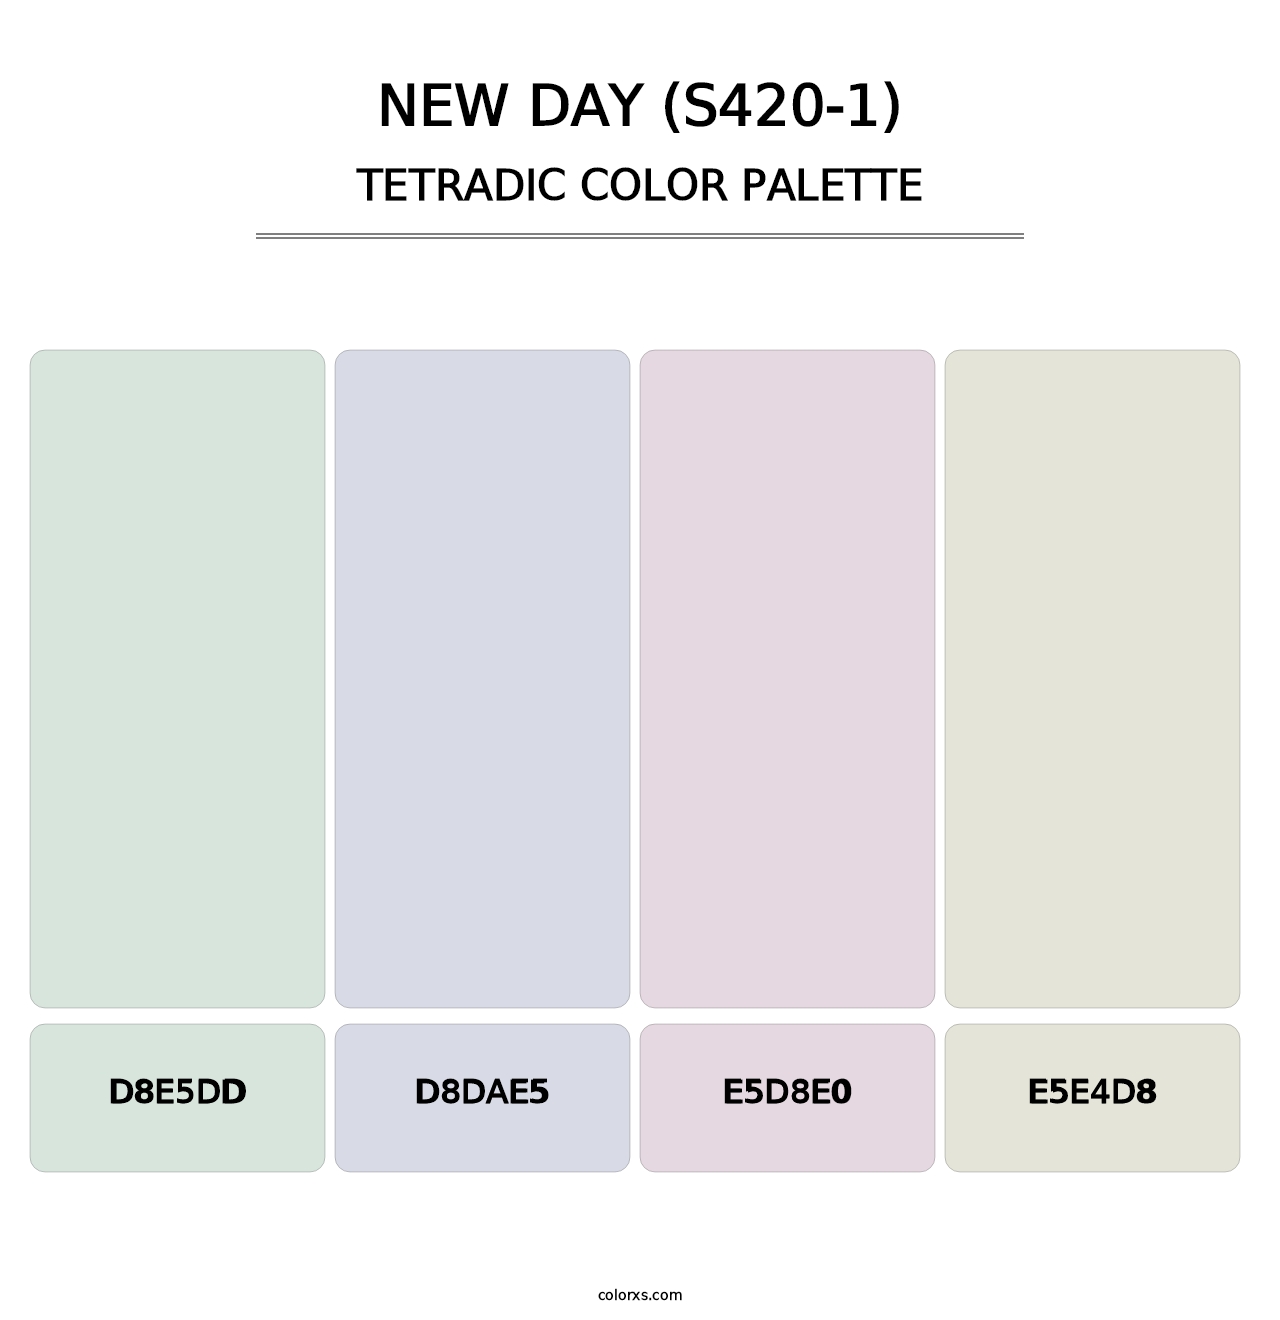 New Day (S420-1) - Tetradic Color Palette